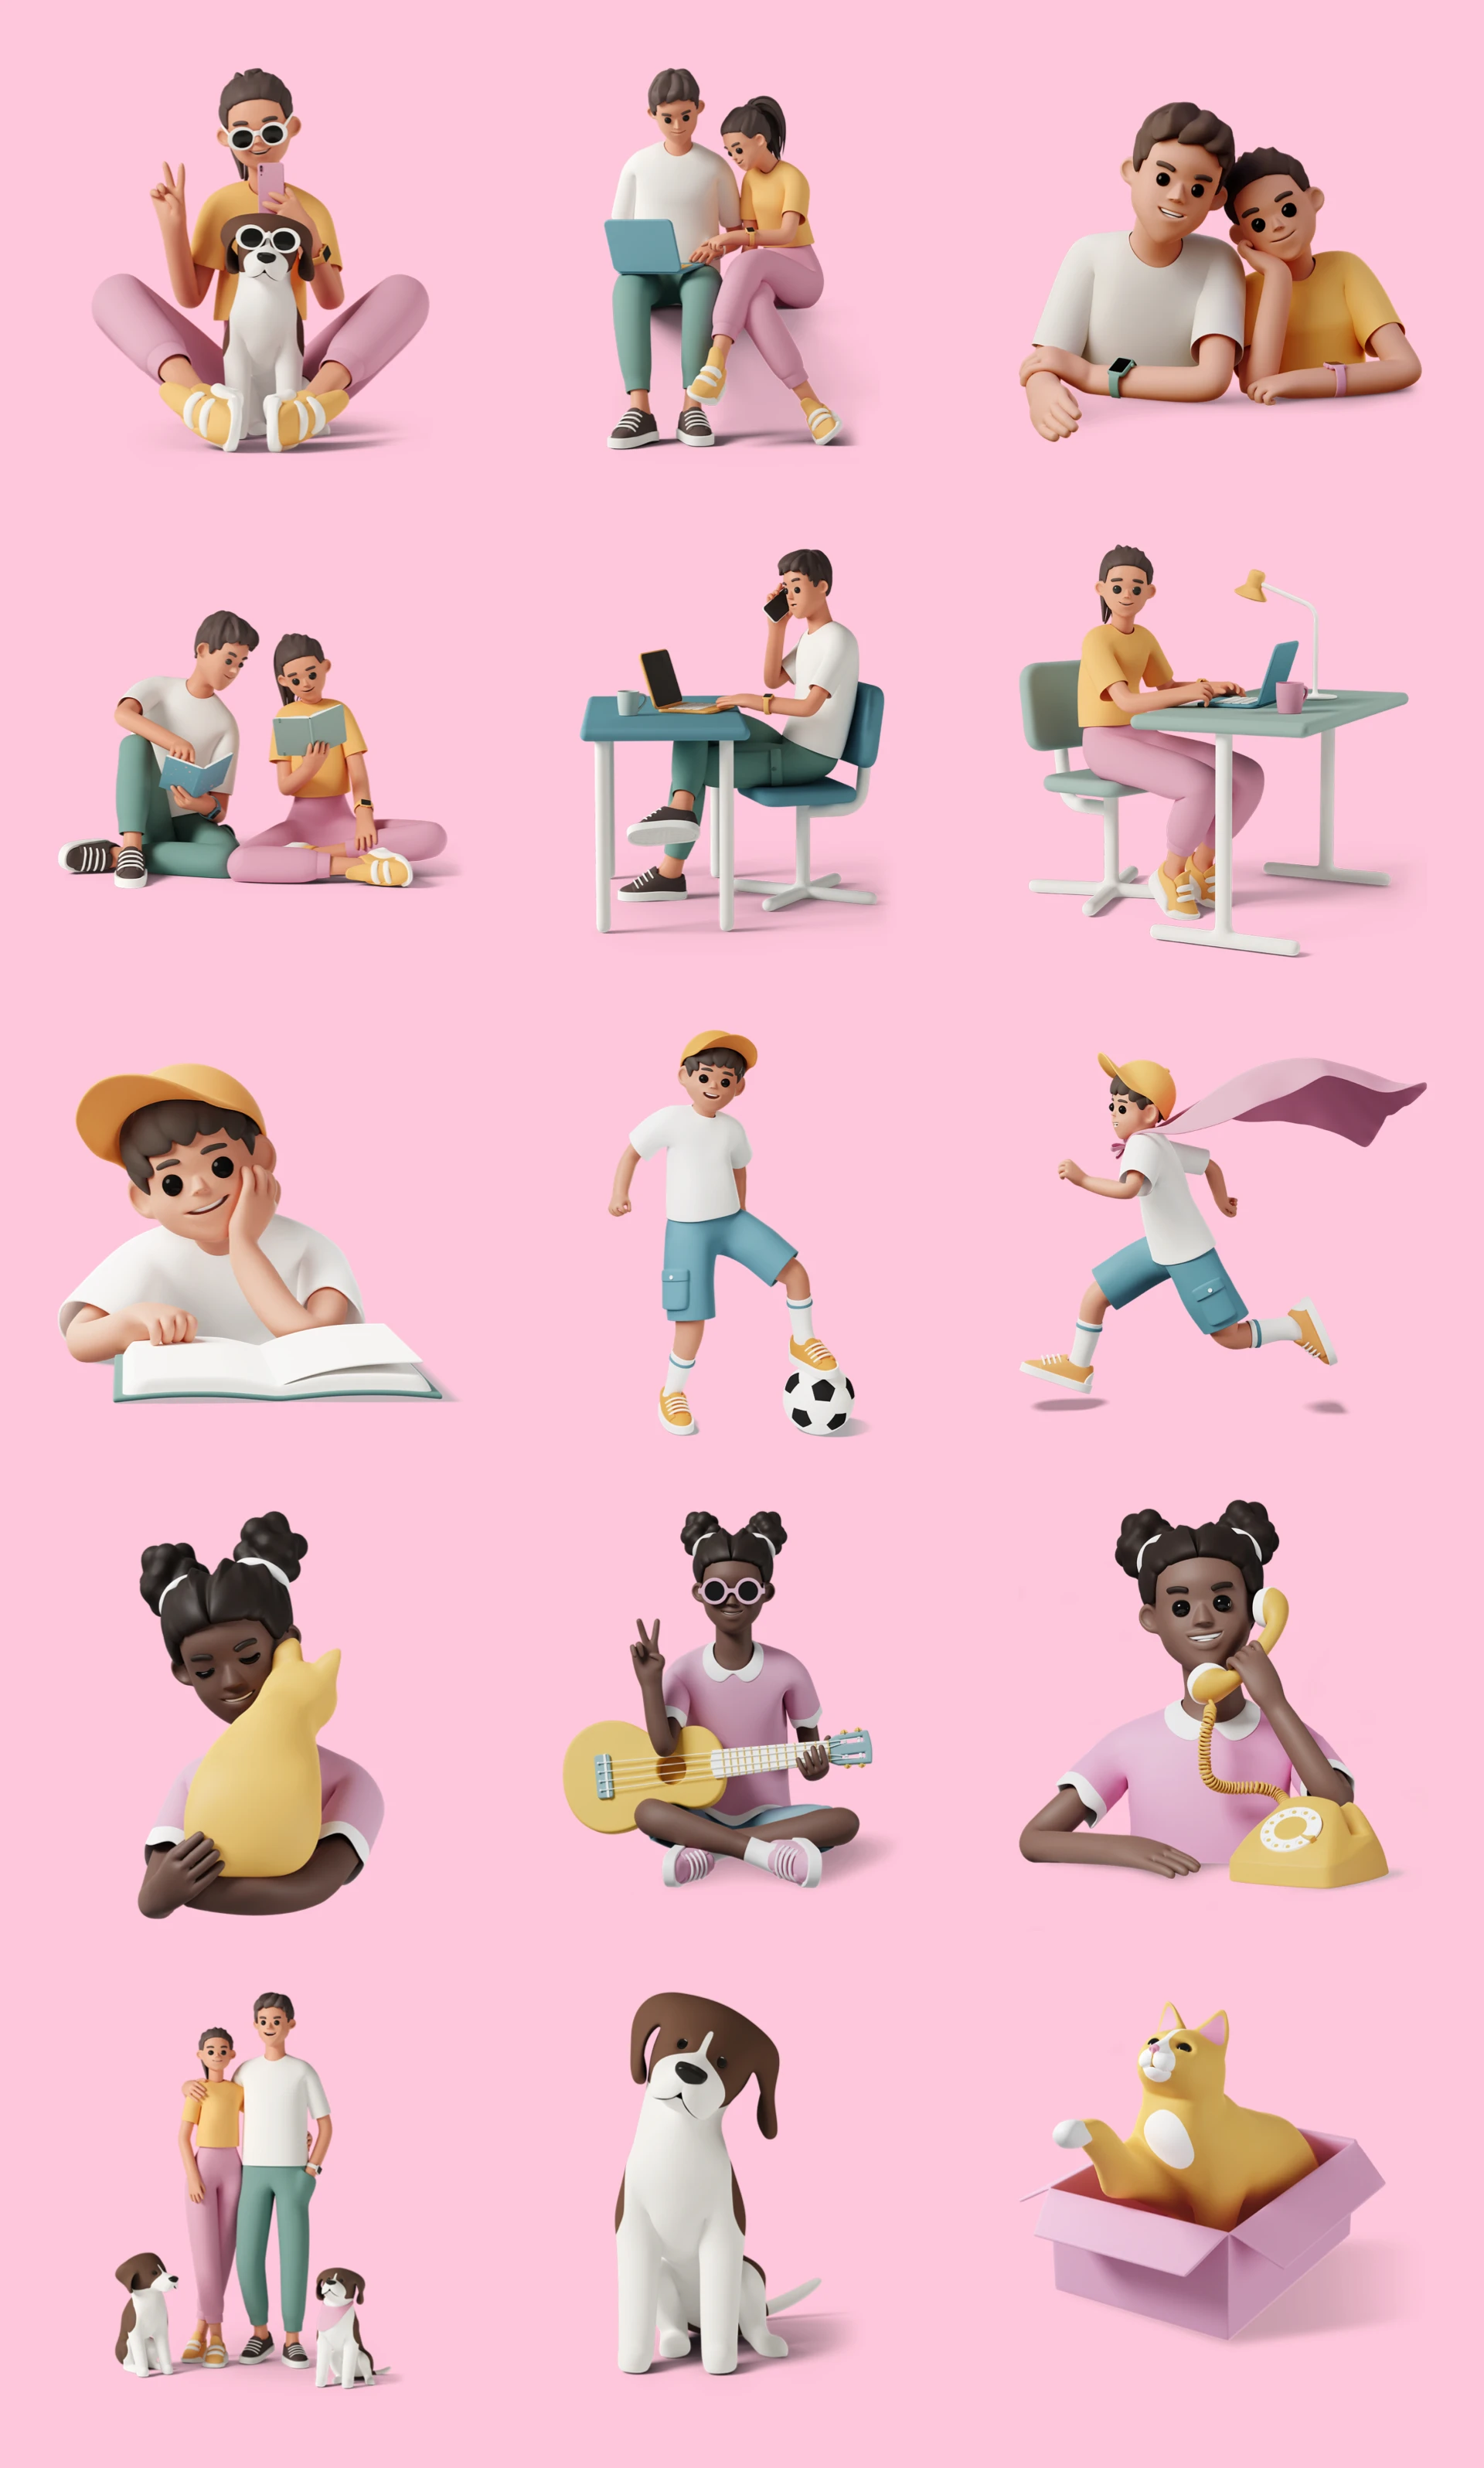 Casual Life 3D Free Illustrations for Figma - Class up your next project with our eye-catching 3D images! Ideal for websites, apps, social media, or marketing.